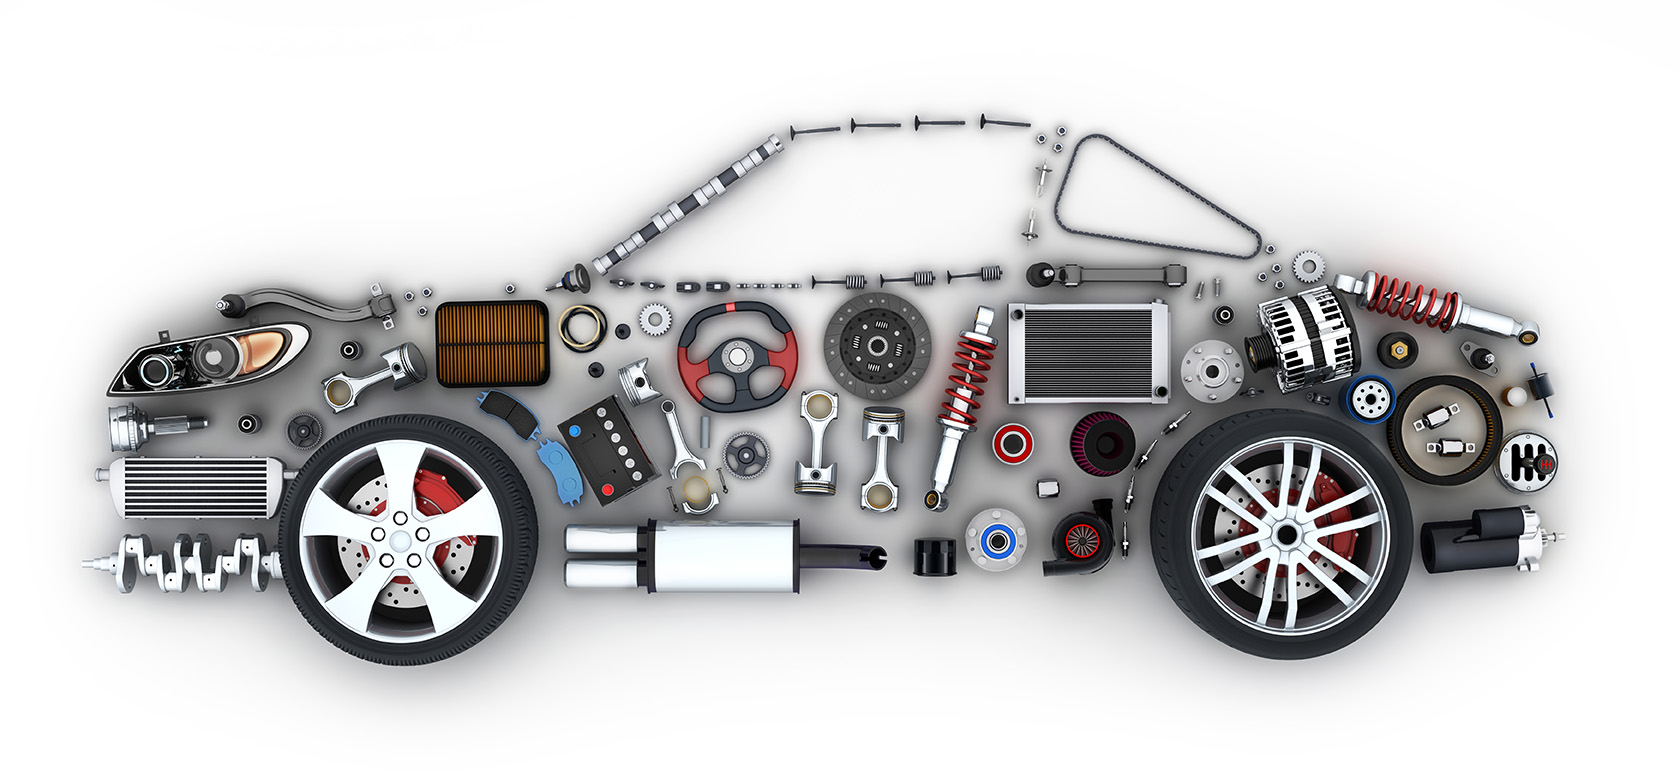 Abstract car and many vehicles parts (done in 3d rendering)